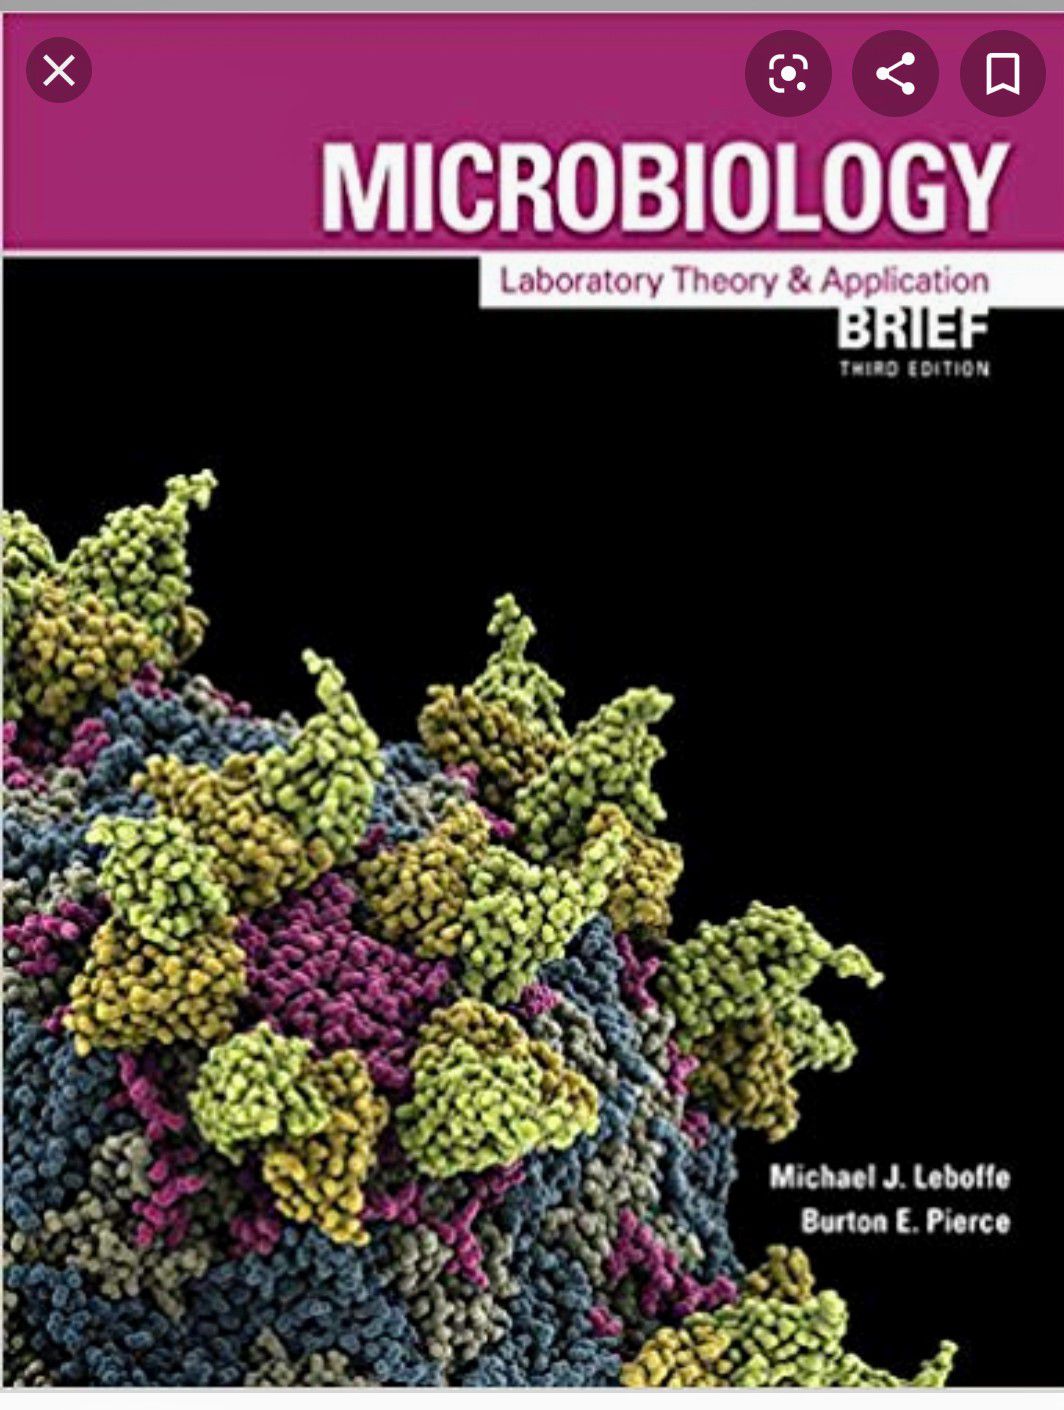 Microbiology Lab Manual 3e for HCC